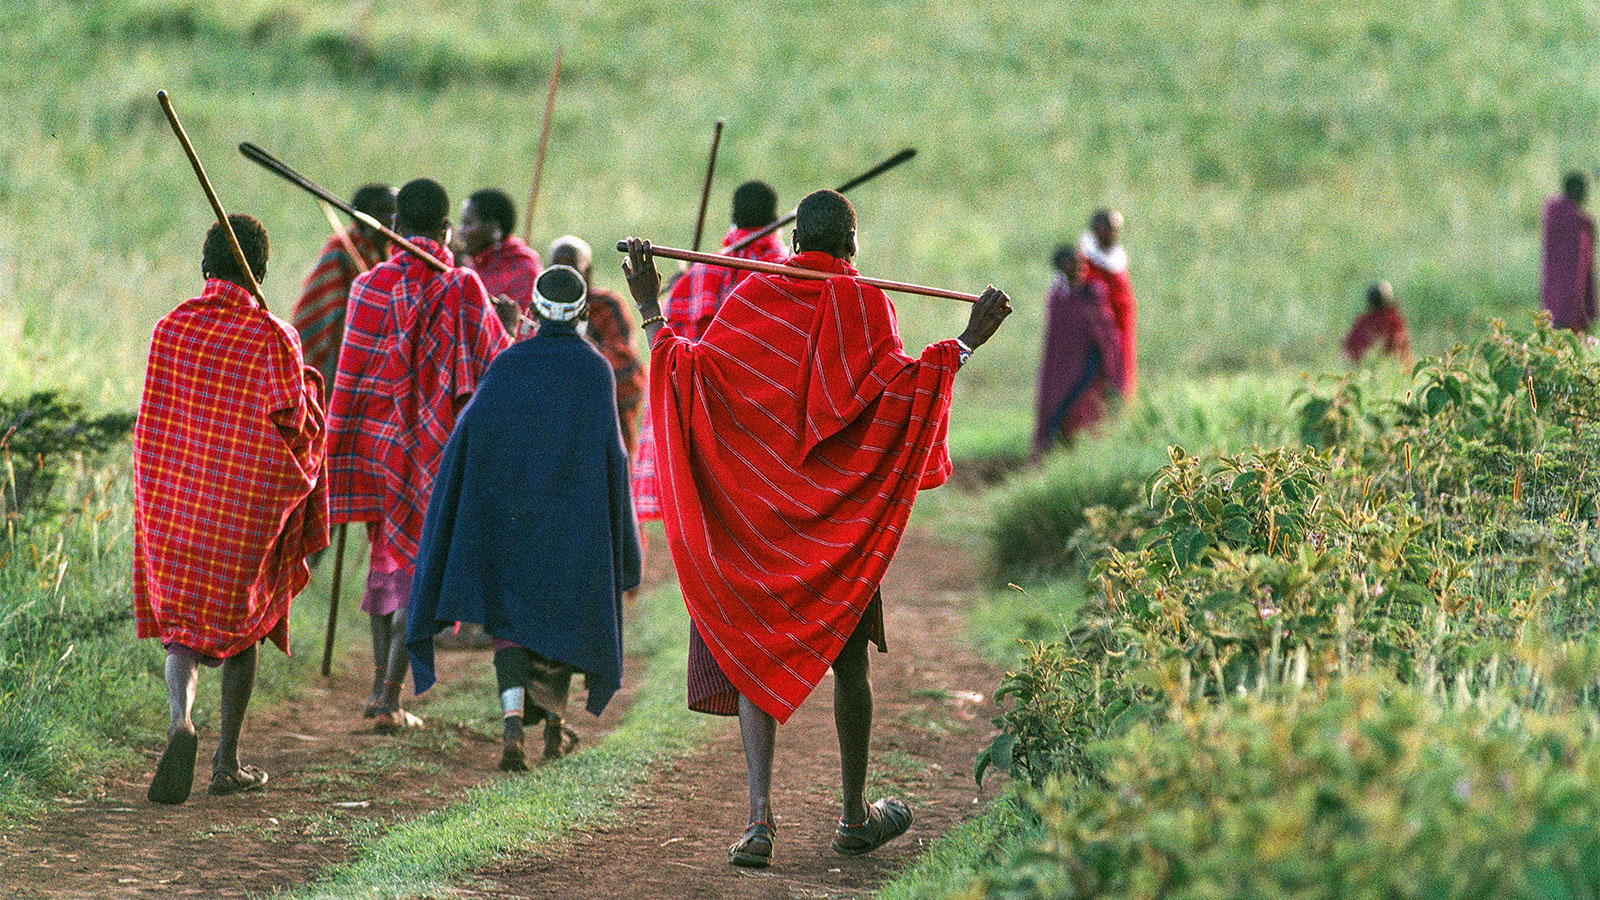 Group of Maasai tribesmen wearing bright red shawls and carrying sticks, walking down a dirt path, viewed from behind